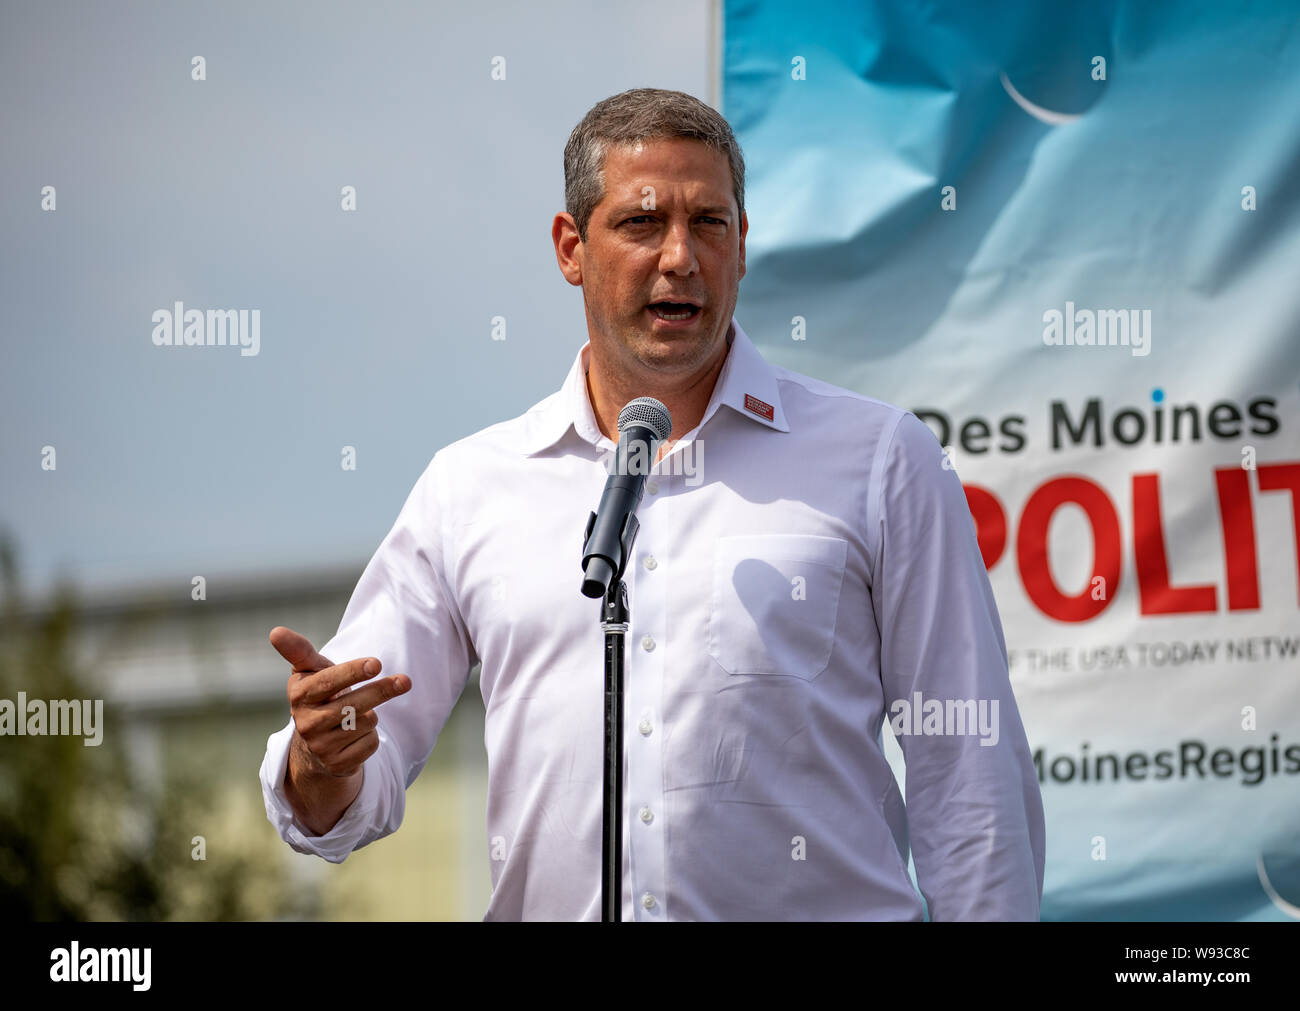 Des Moines, Iowa / USA - August 10, 2019: United States Congressman and Democratic presidential candidate Tim Ryan greets supporters at the Iowa State Stock Photo